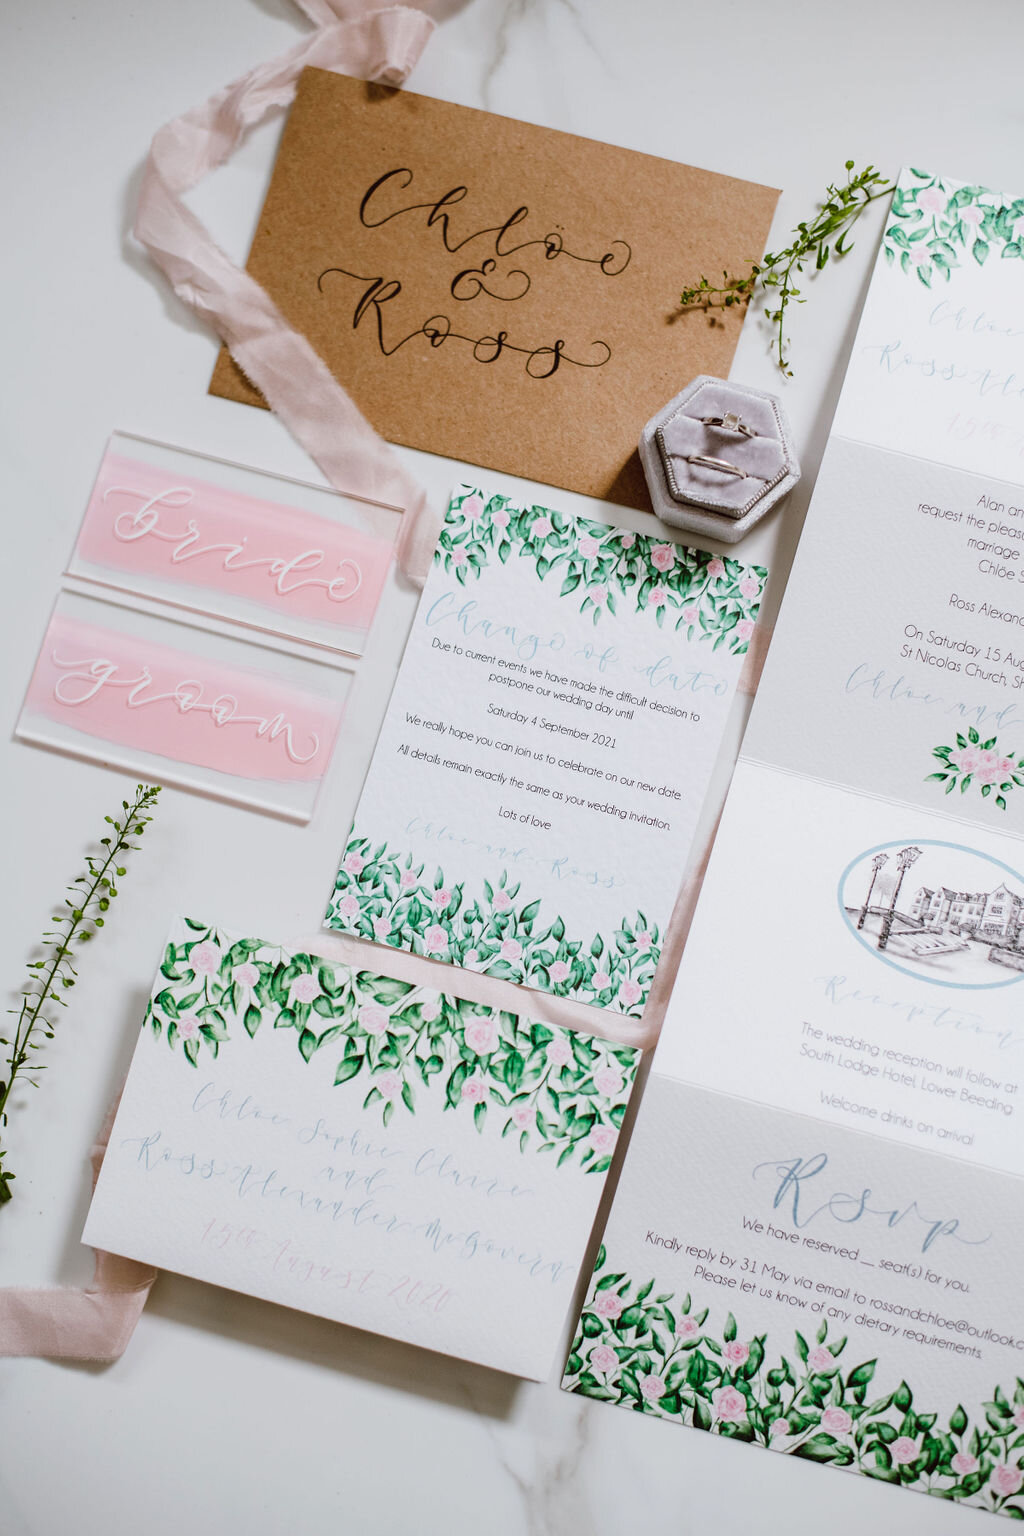 blush pink and dusty blue floral concertina invitations with calligraphy and illustration of South Lodge - The Amyverse with map and calligraphy envelope.jpg